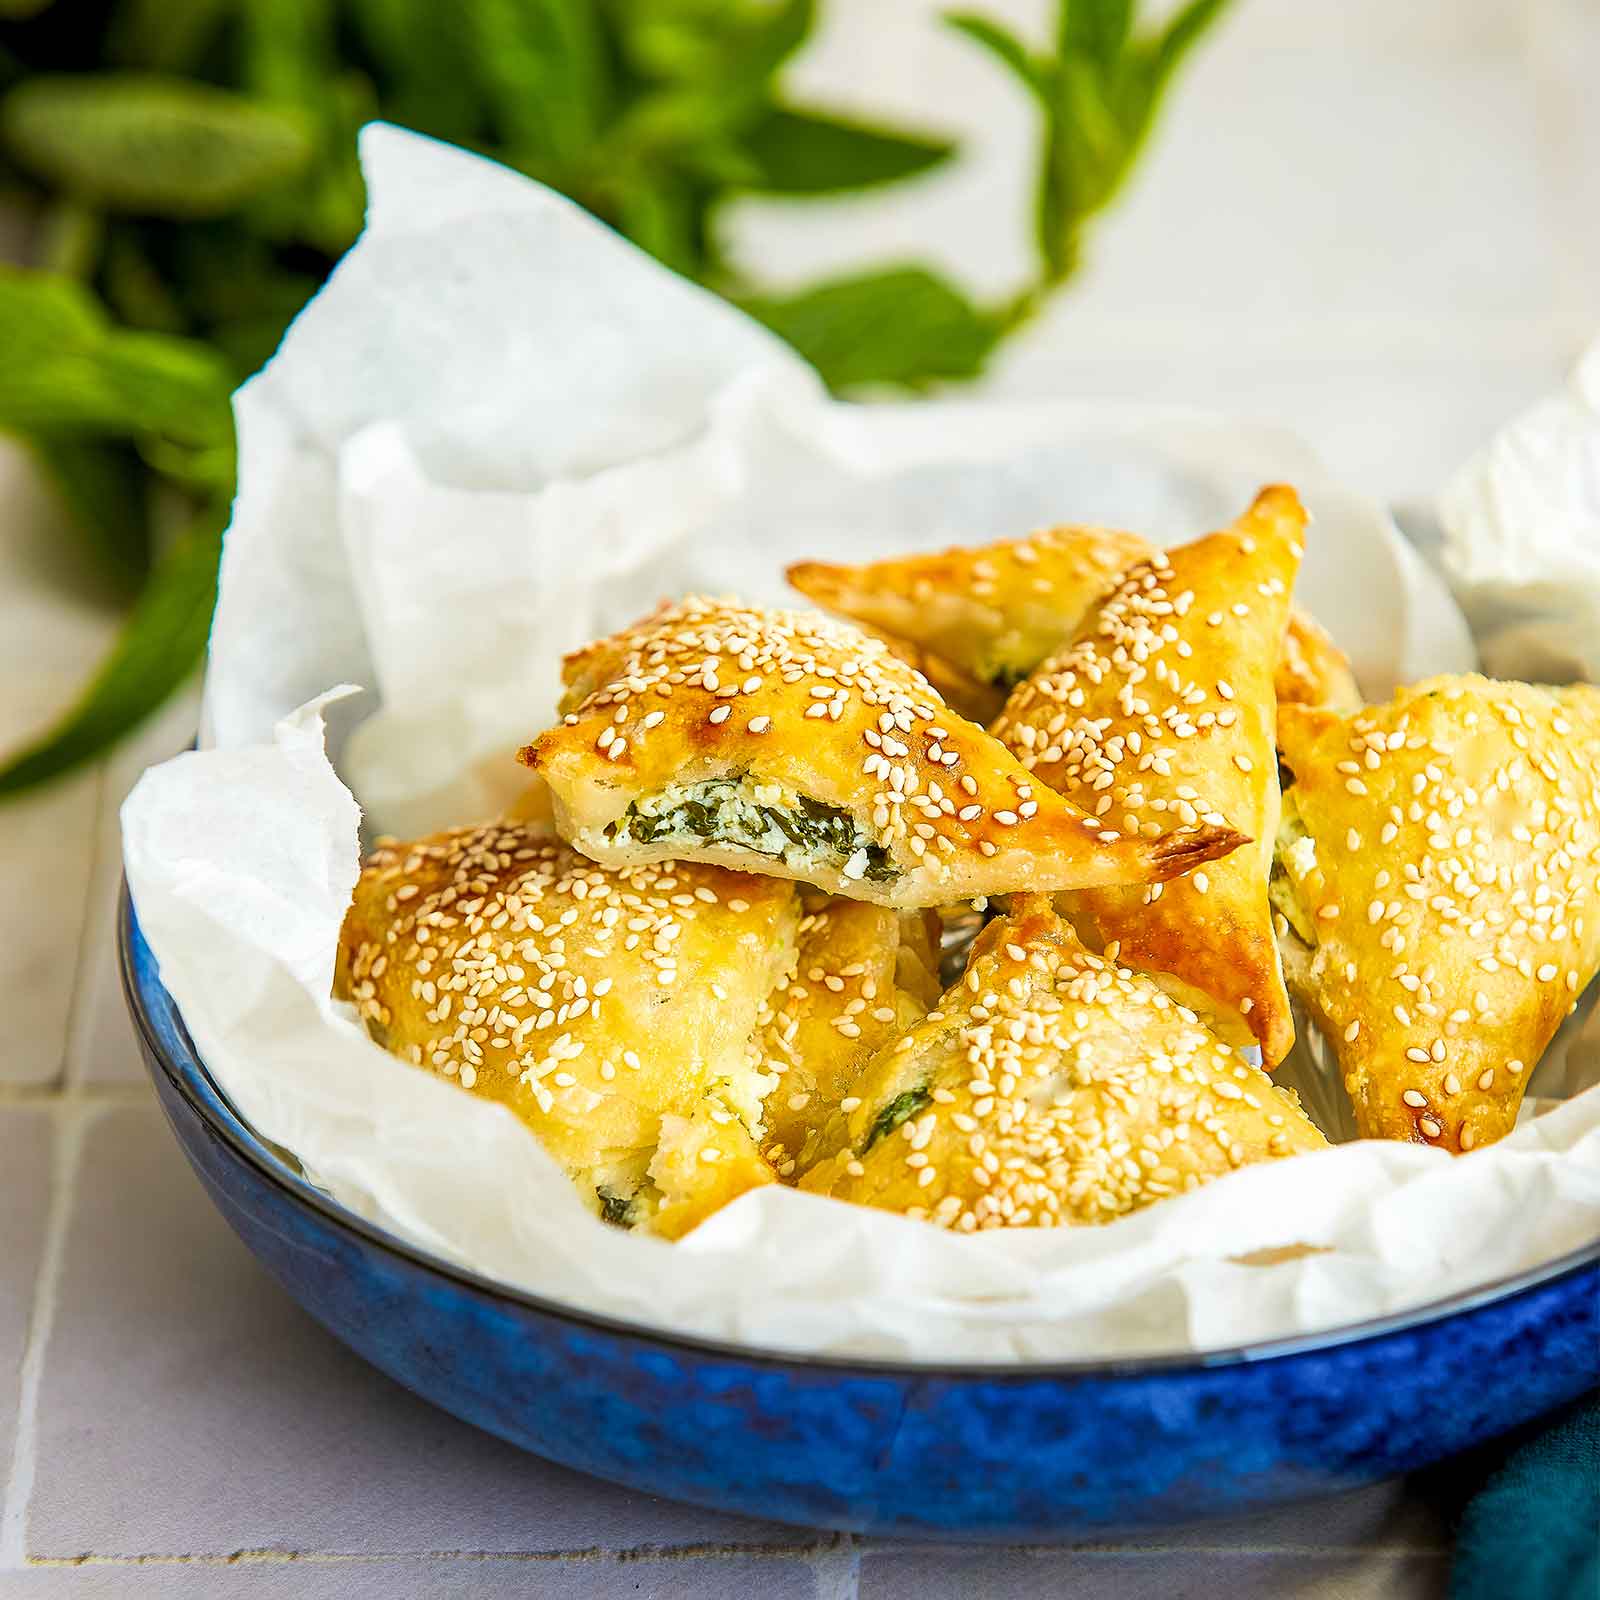 Gluten-free spinach and cheese triangles are piled into a blue bowl lined with paper. A bunch of fresh mint is blurred in the background.